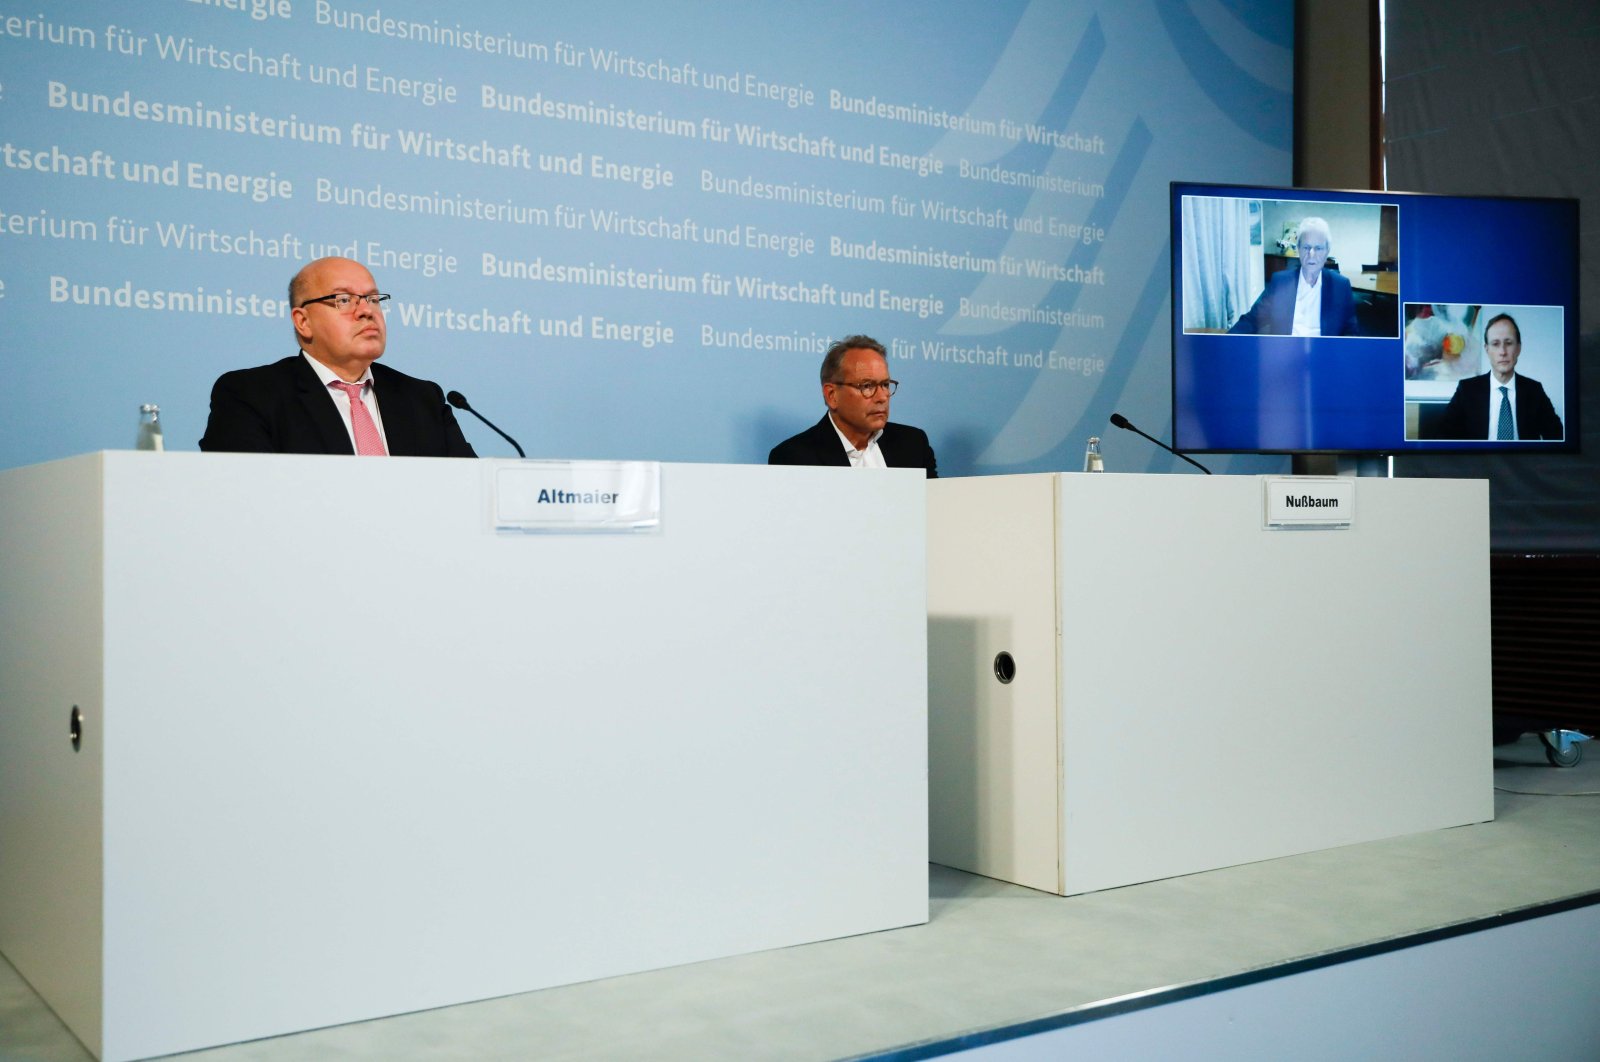 German Economy Minister Peter Altmaier (L), and state secretary at the economic ministry Ulrich Nussbaum (R) attend a news conference with CureVac main shareholder Dietmar Hopp (on the screen left) at the economy ministry in Berlin, June 15, 2020. (AFP Photo)